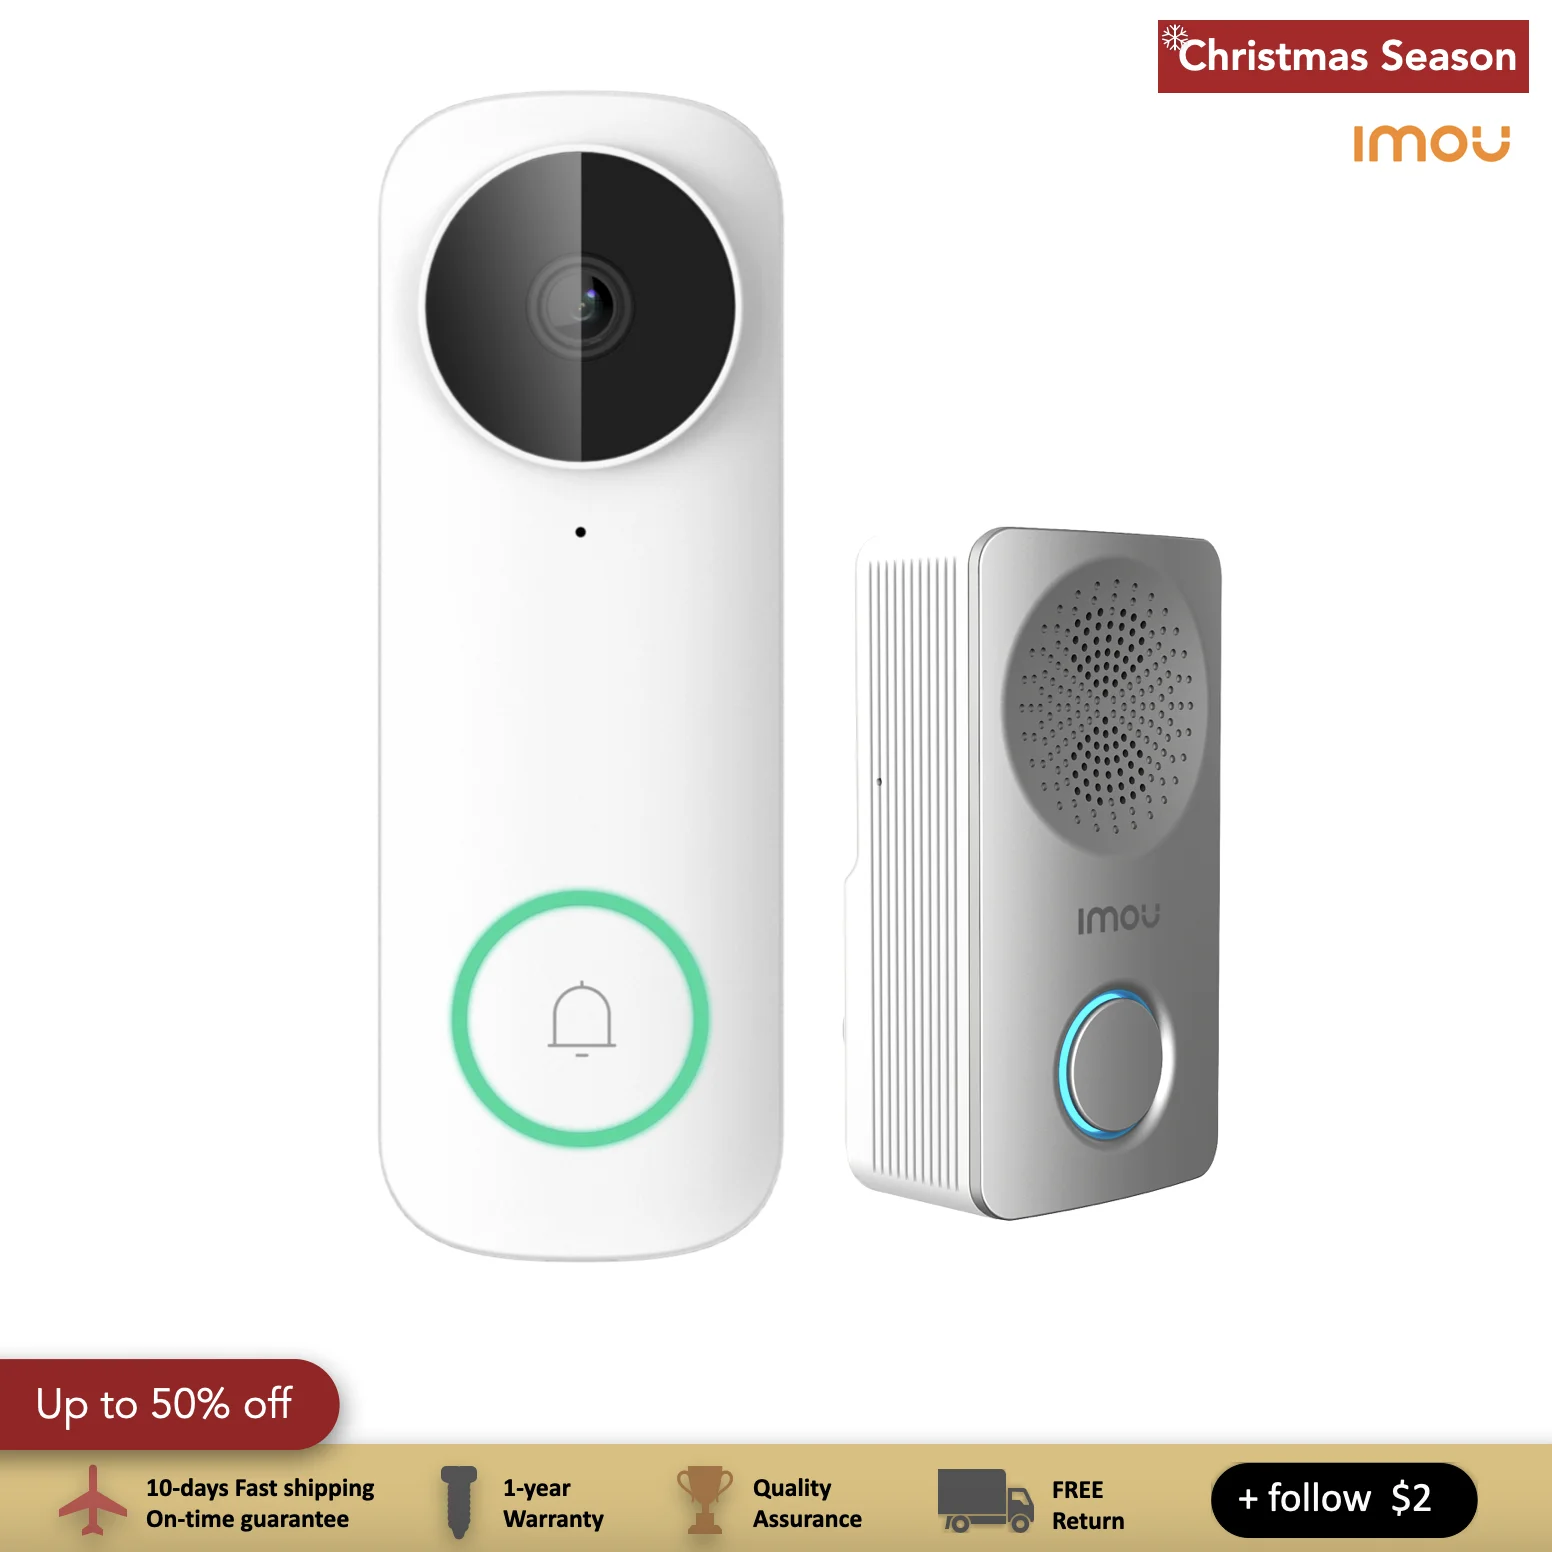 IMOU DB61 Smart Home Video Doorbell Wired WiFi Door Bell 4MP QHD Security Camera RIP Sensor HDR Night Vision Alexa Local Storage